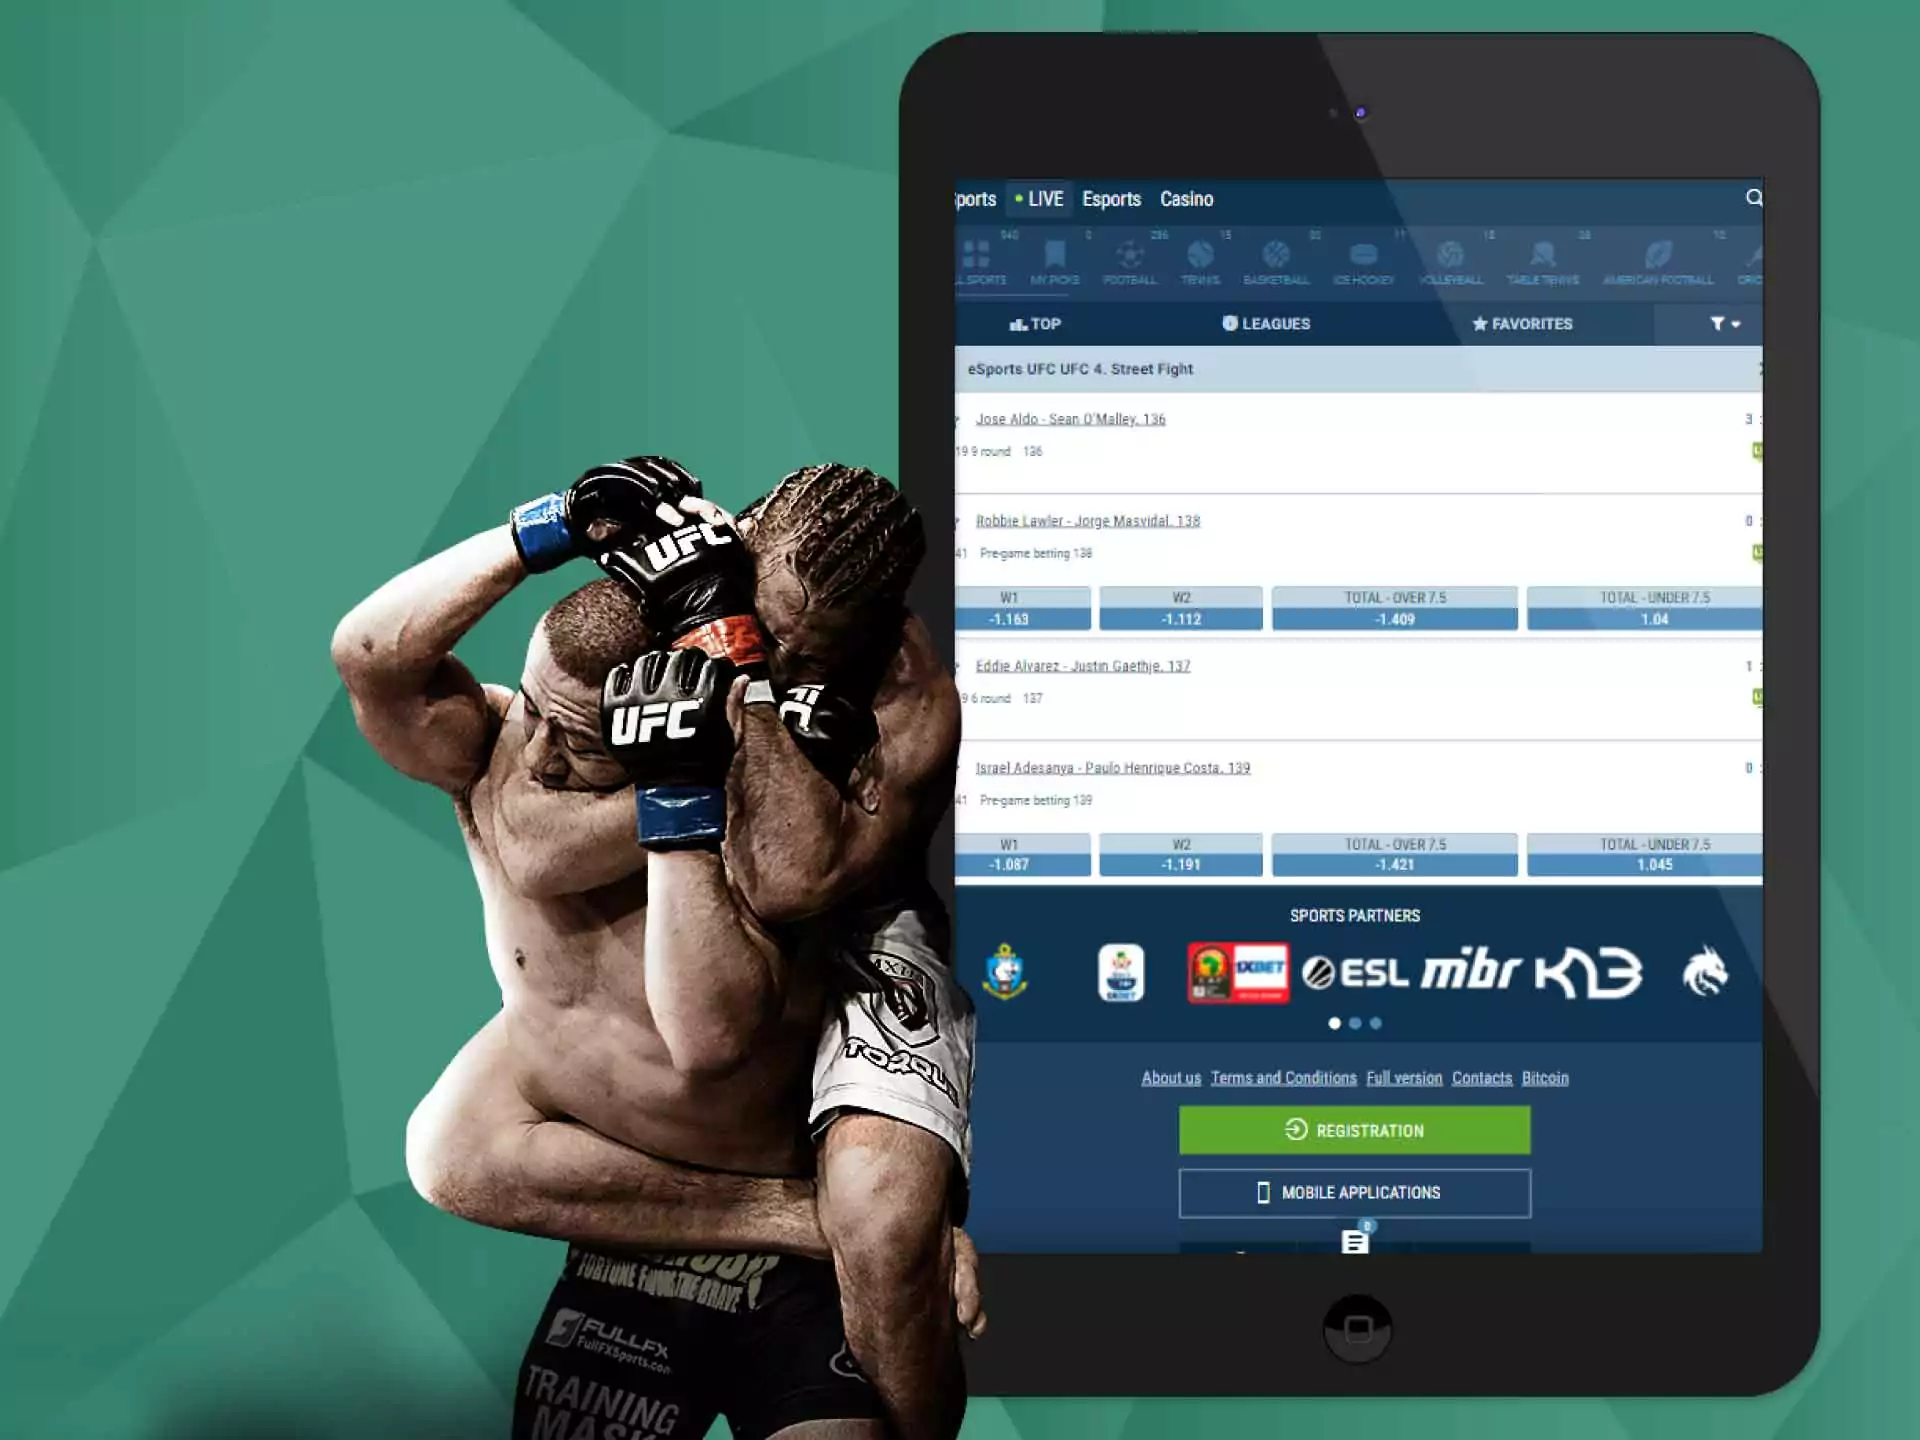 Place bets on UFC fighters in the 1xBet sportsbook.